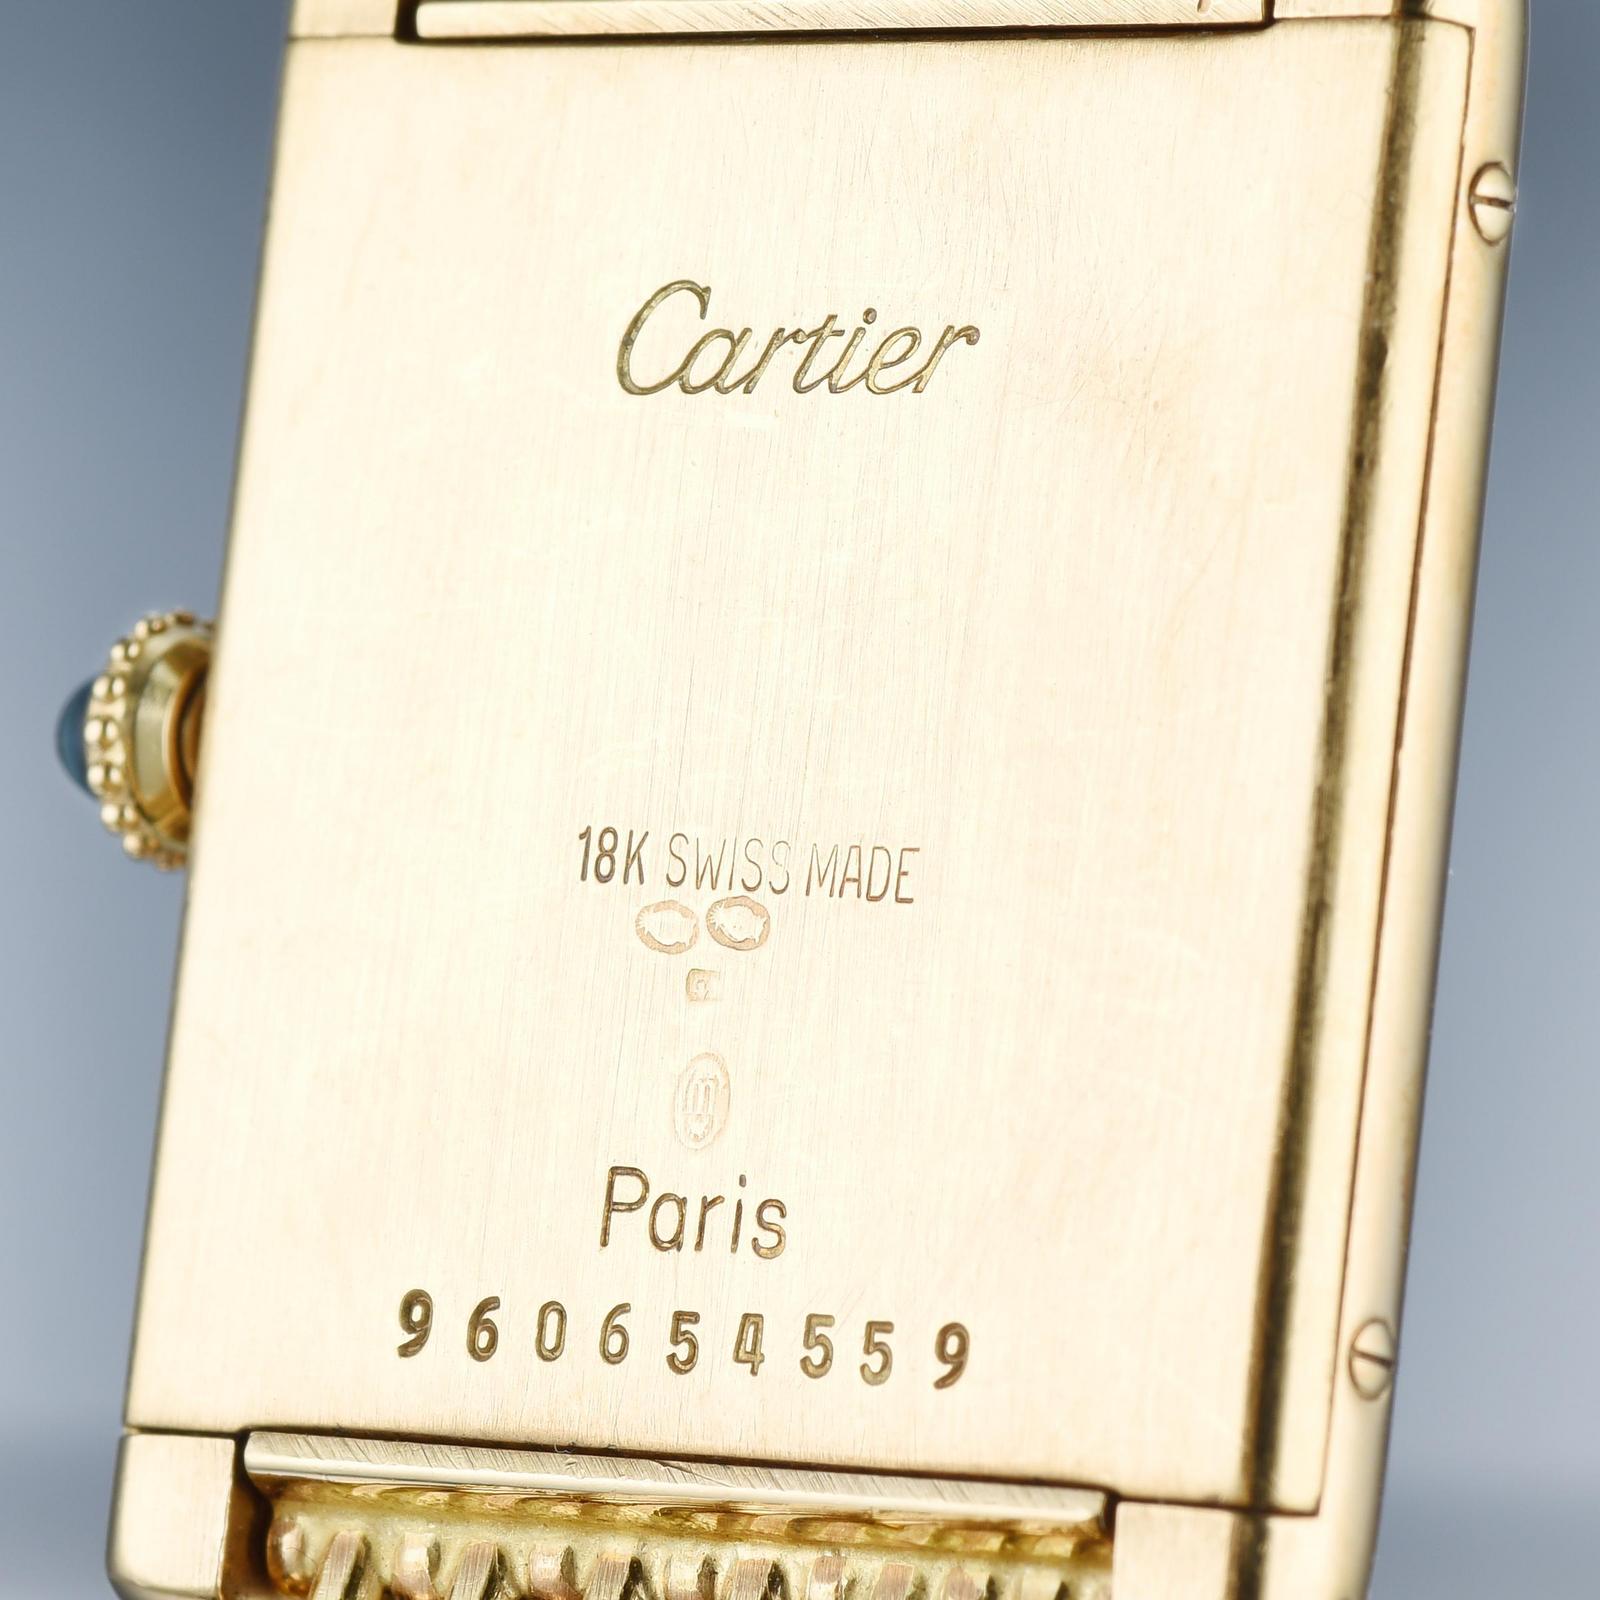 Cartier Tank CPCP with Beads of Rice Bracelet in 18K Gold — Wind